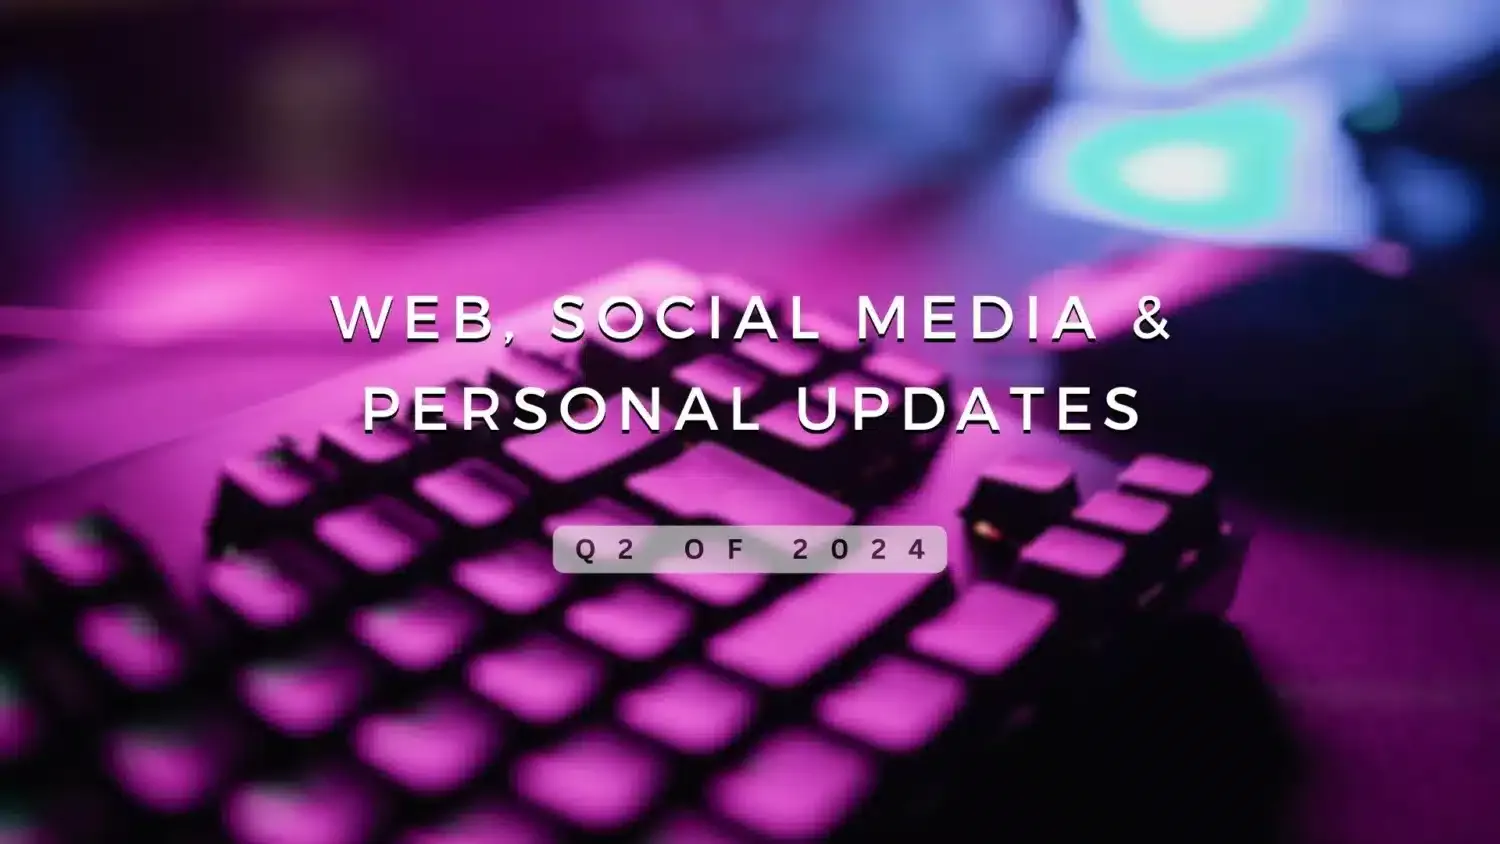 Web Site, Social Media and Personal Updates for Q2 of 2024. Created with Canva